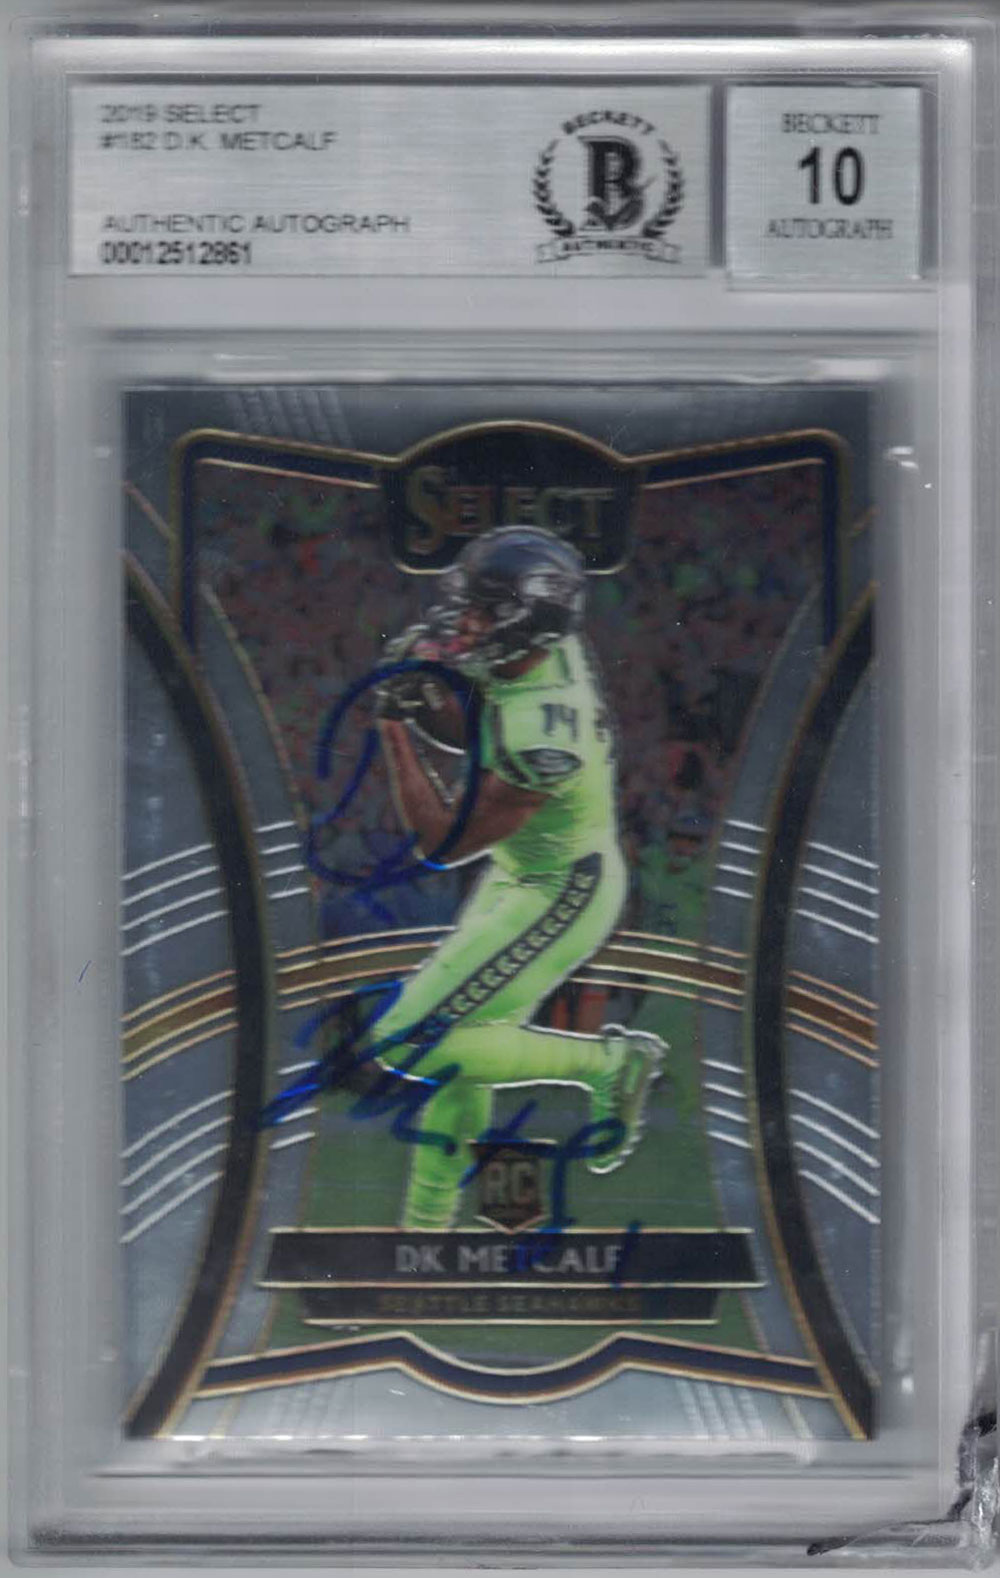 DK Metcalf Signed Seattle Seahawks 2019 Select Trading Card BAS 10 Slab 29606